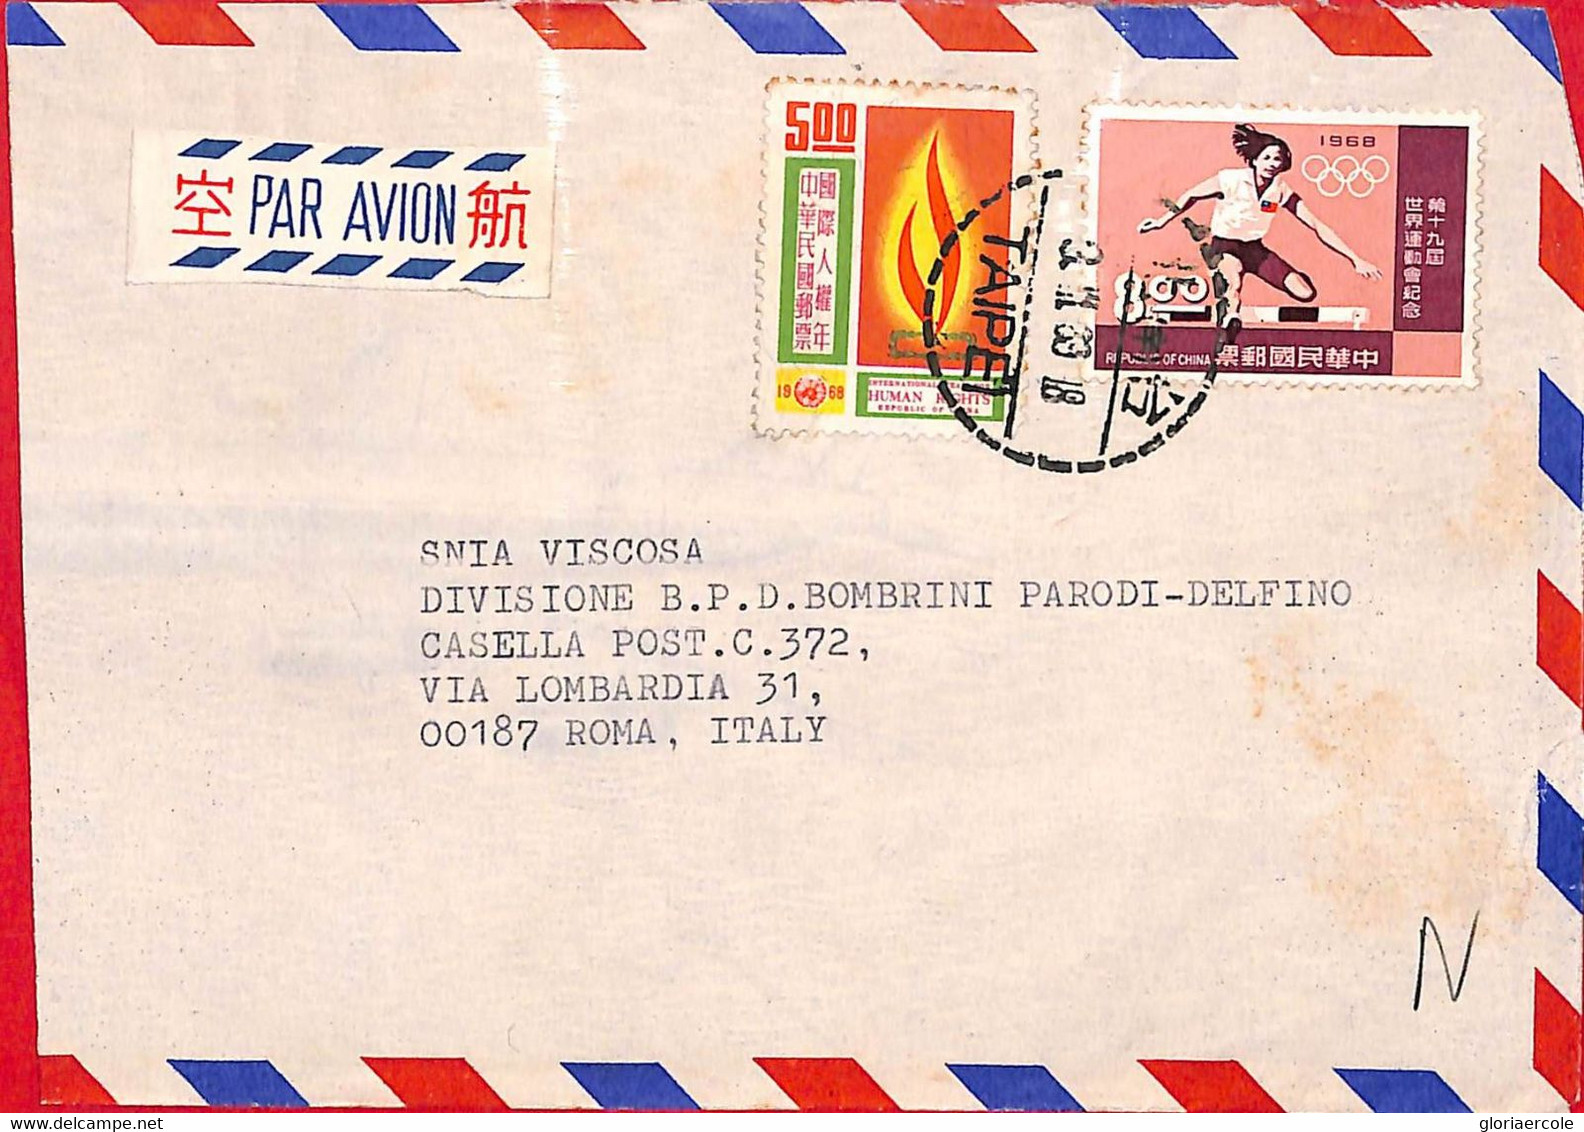 Aa6667 - CHINA Taiwan - Postal History -  AIRMAIL Cover To ITALY 1960's OLYMPICS - Covers & Documents